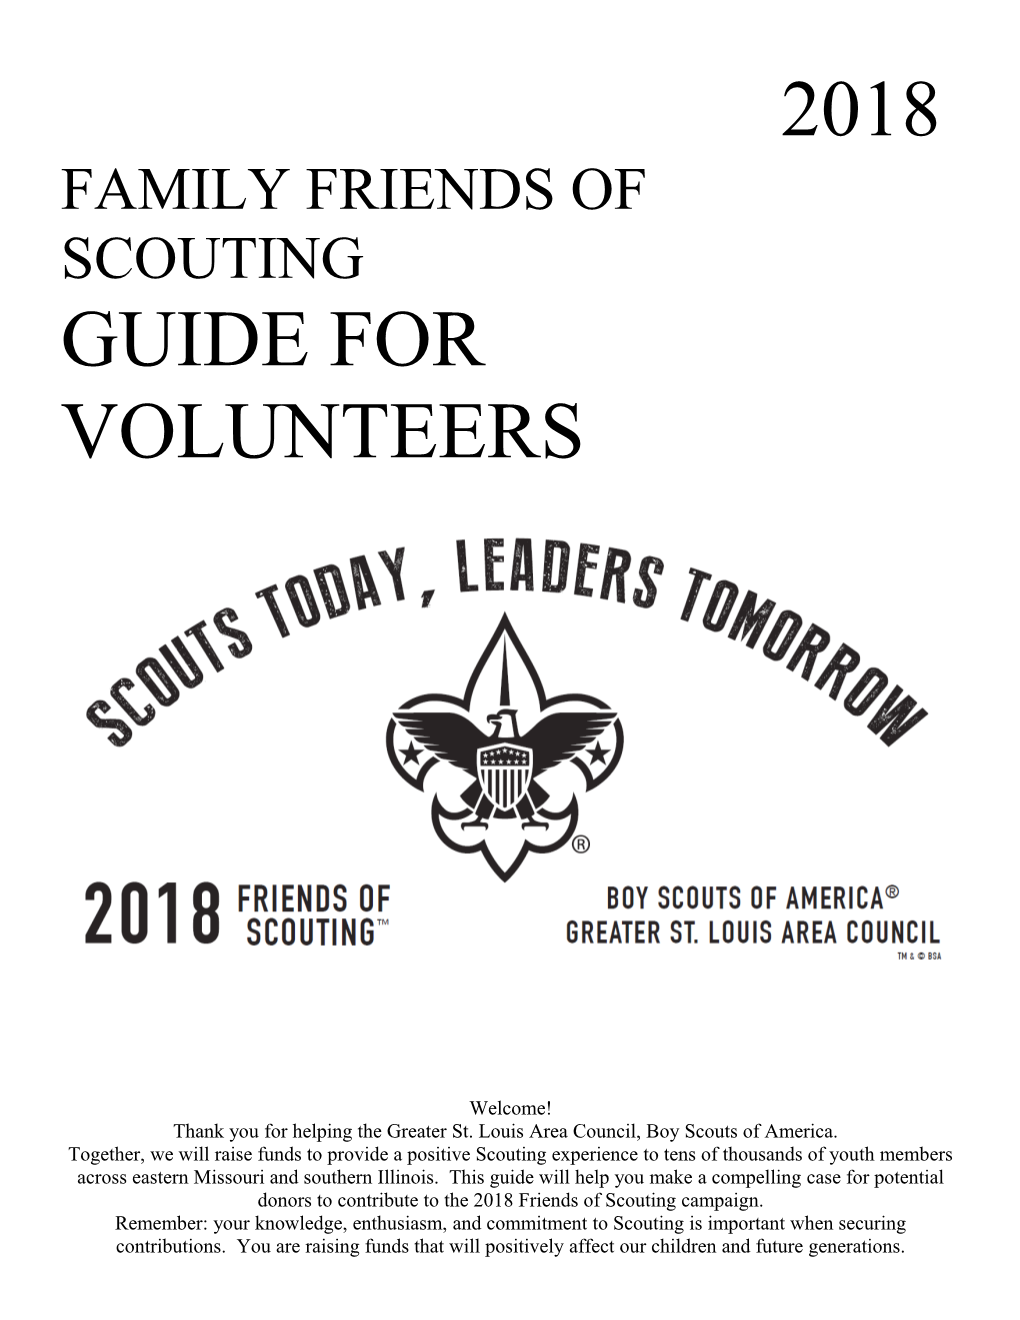 Family Friends of Scouting